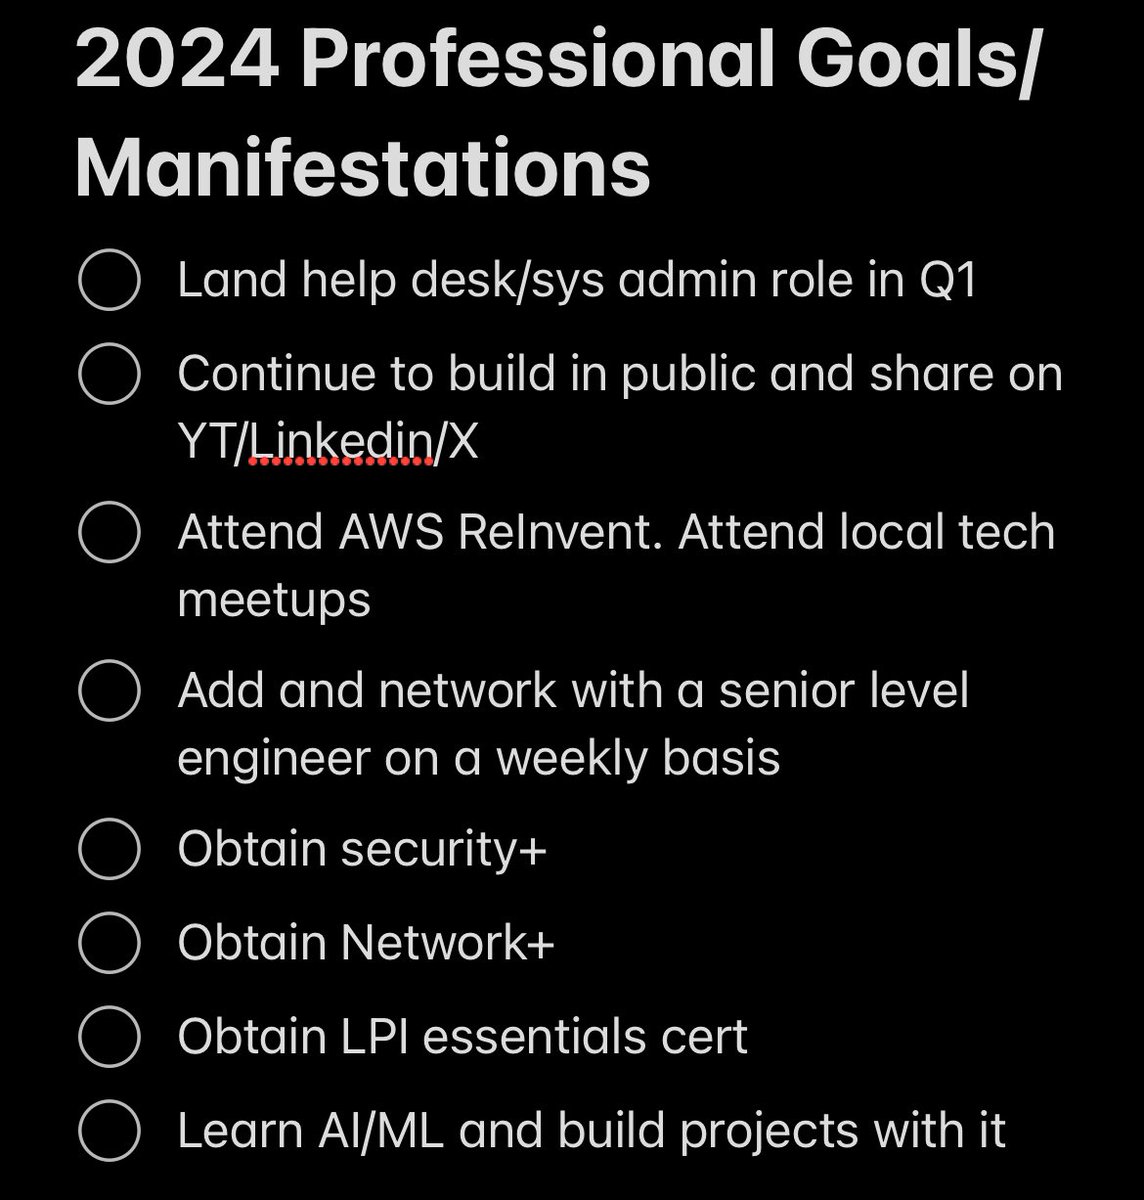 As the new wines down, here is a list of some of professional/career goals. It is not an exhaustive list. I’m still adding to it and making changes as I go🧑🏾‍💻📚💯💯

Let’s go!

#2024goals #growthmindset #tech #itsupport #techbound #techwithgeorgebaidoo